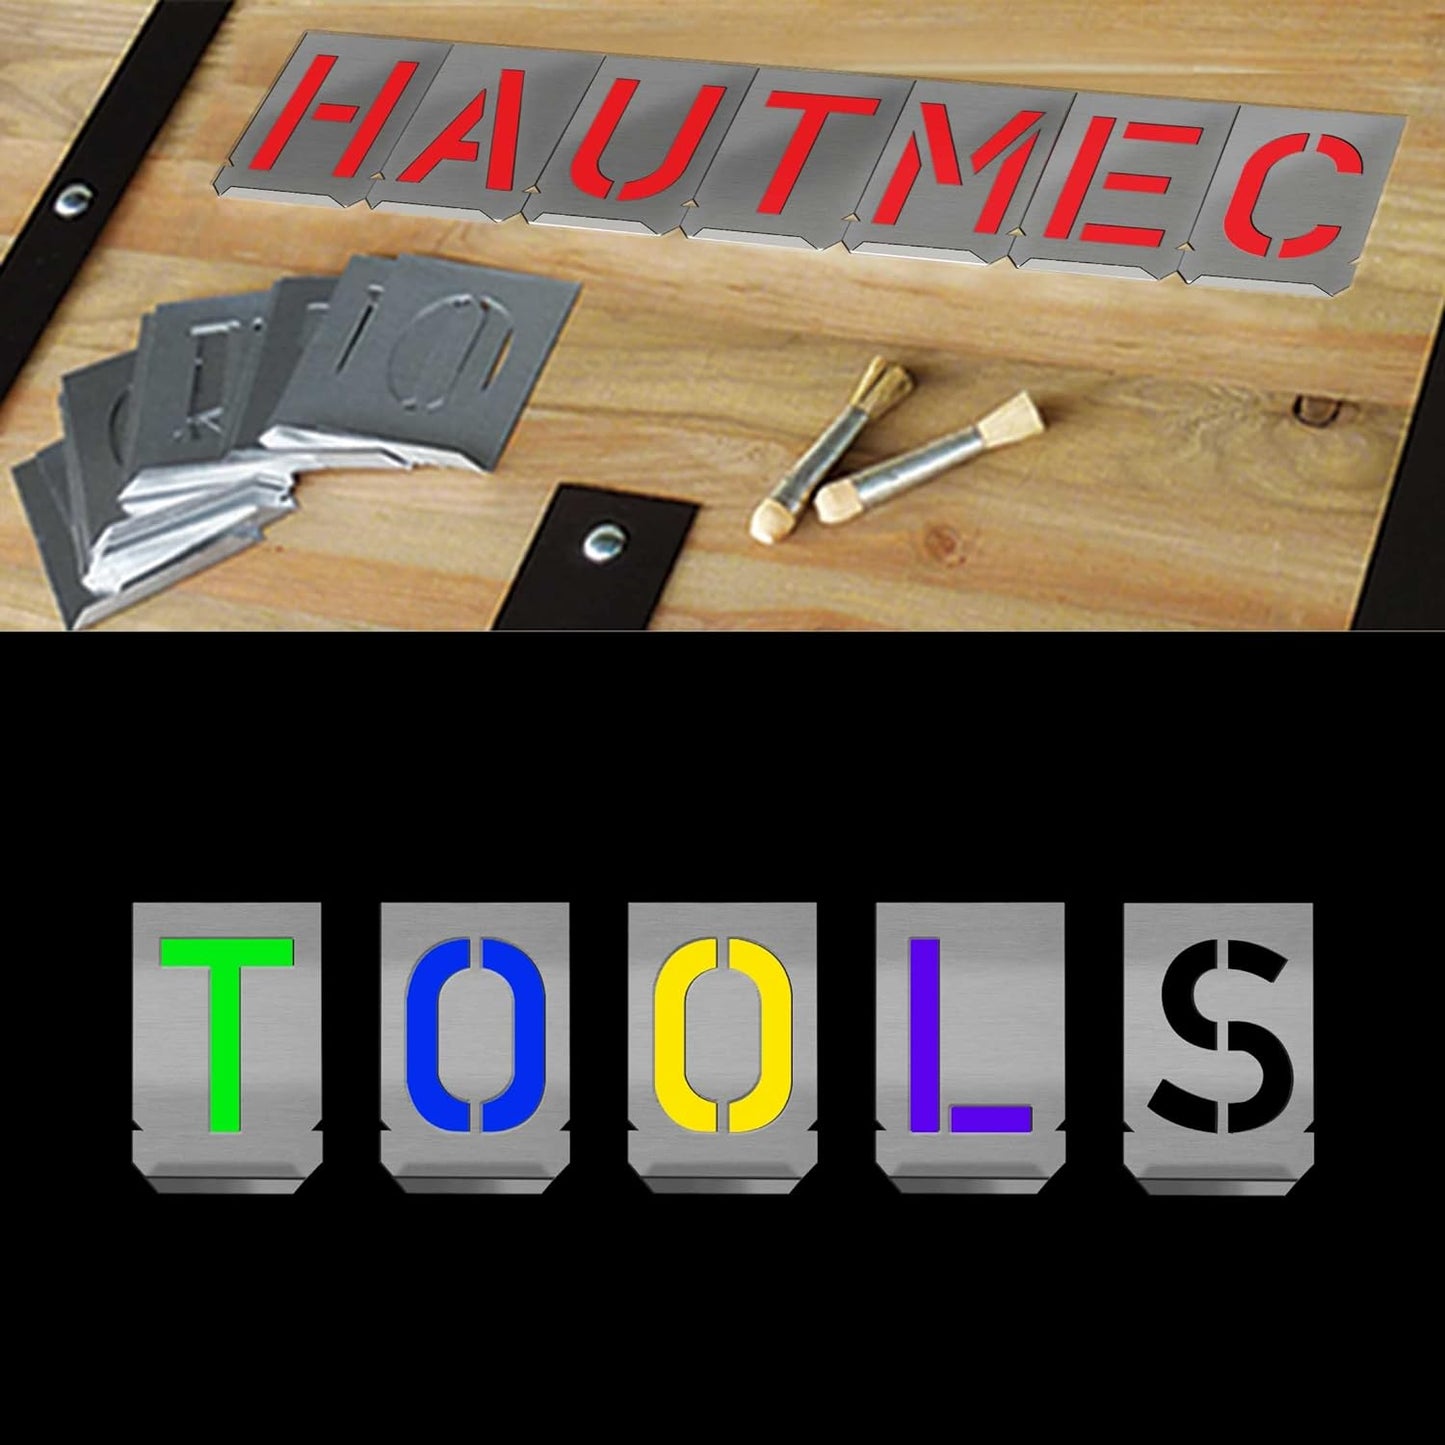 HAUTMEC Vintage Stainless Steel Letters Stencils, A to Z Stainless Steel Stencils & Holder, 40mm Letters, Shop Stencil, Advertising Stencilling, Craft-Printing, Reusable HT0239-ST